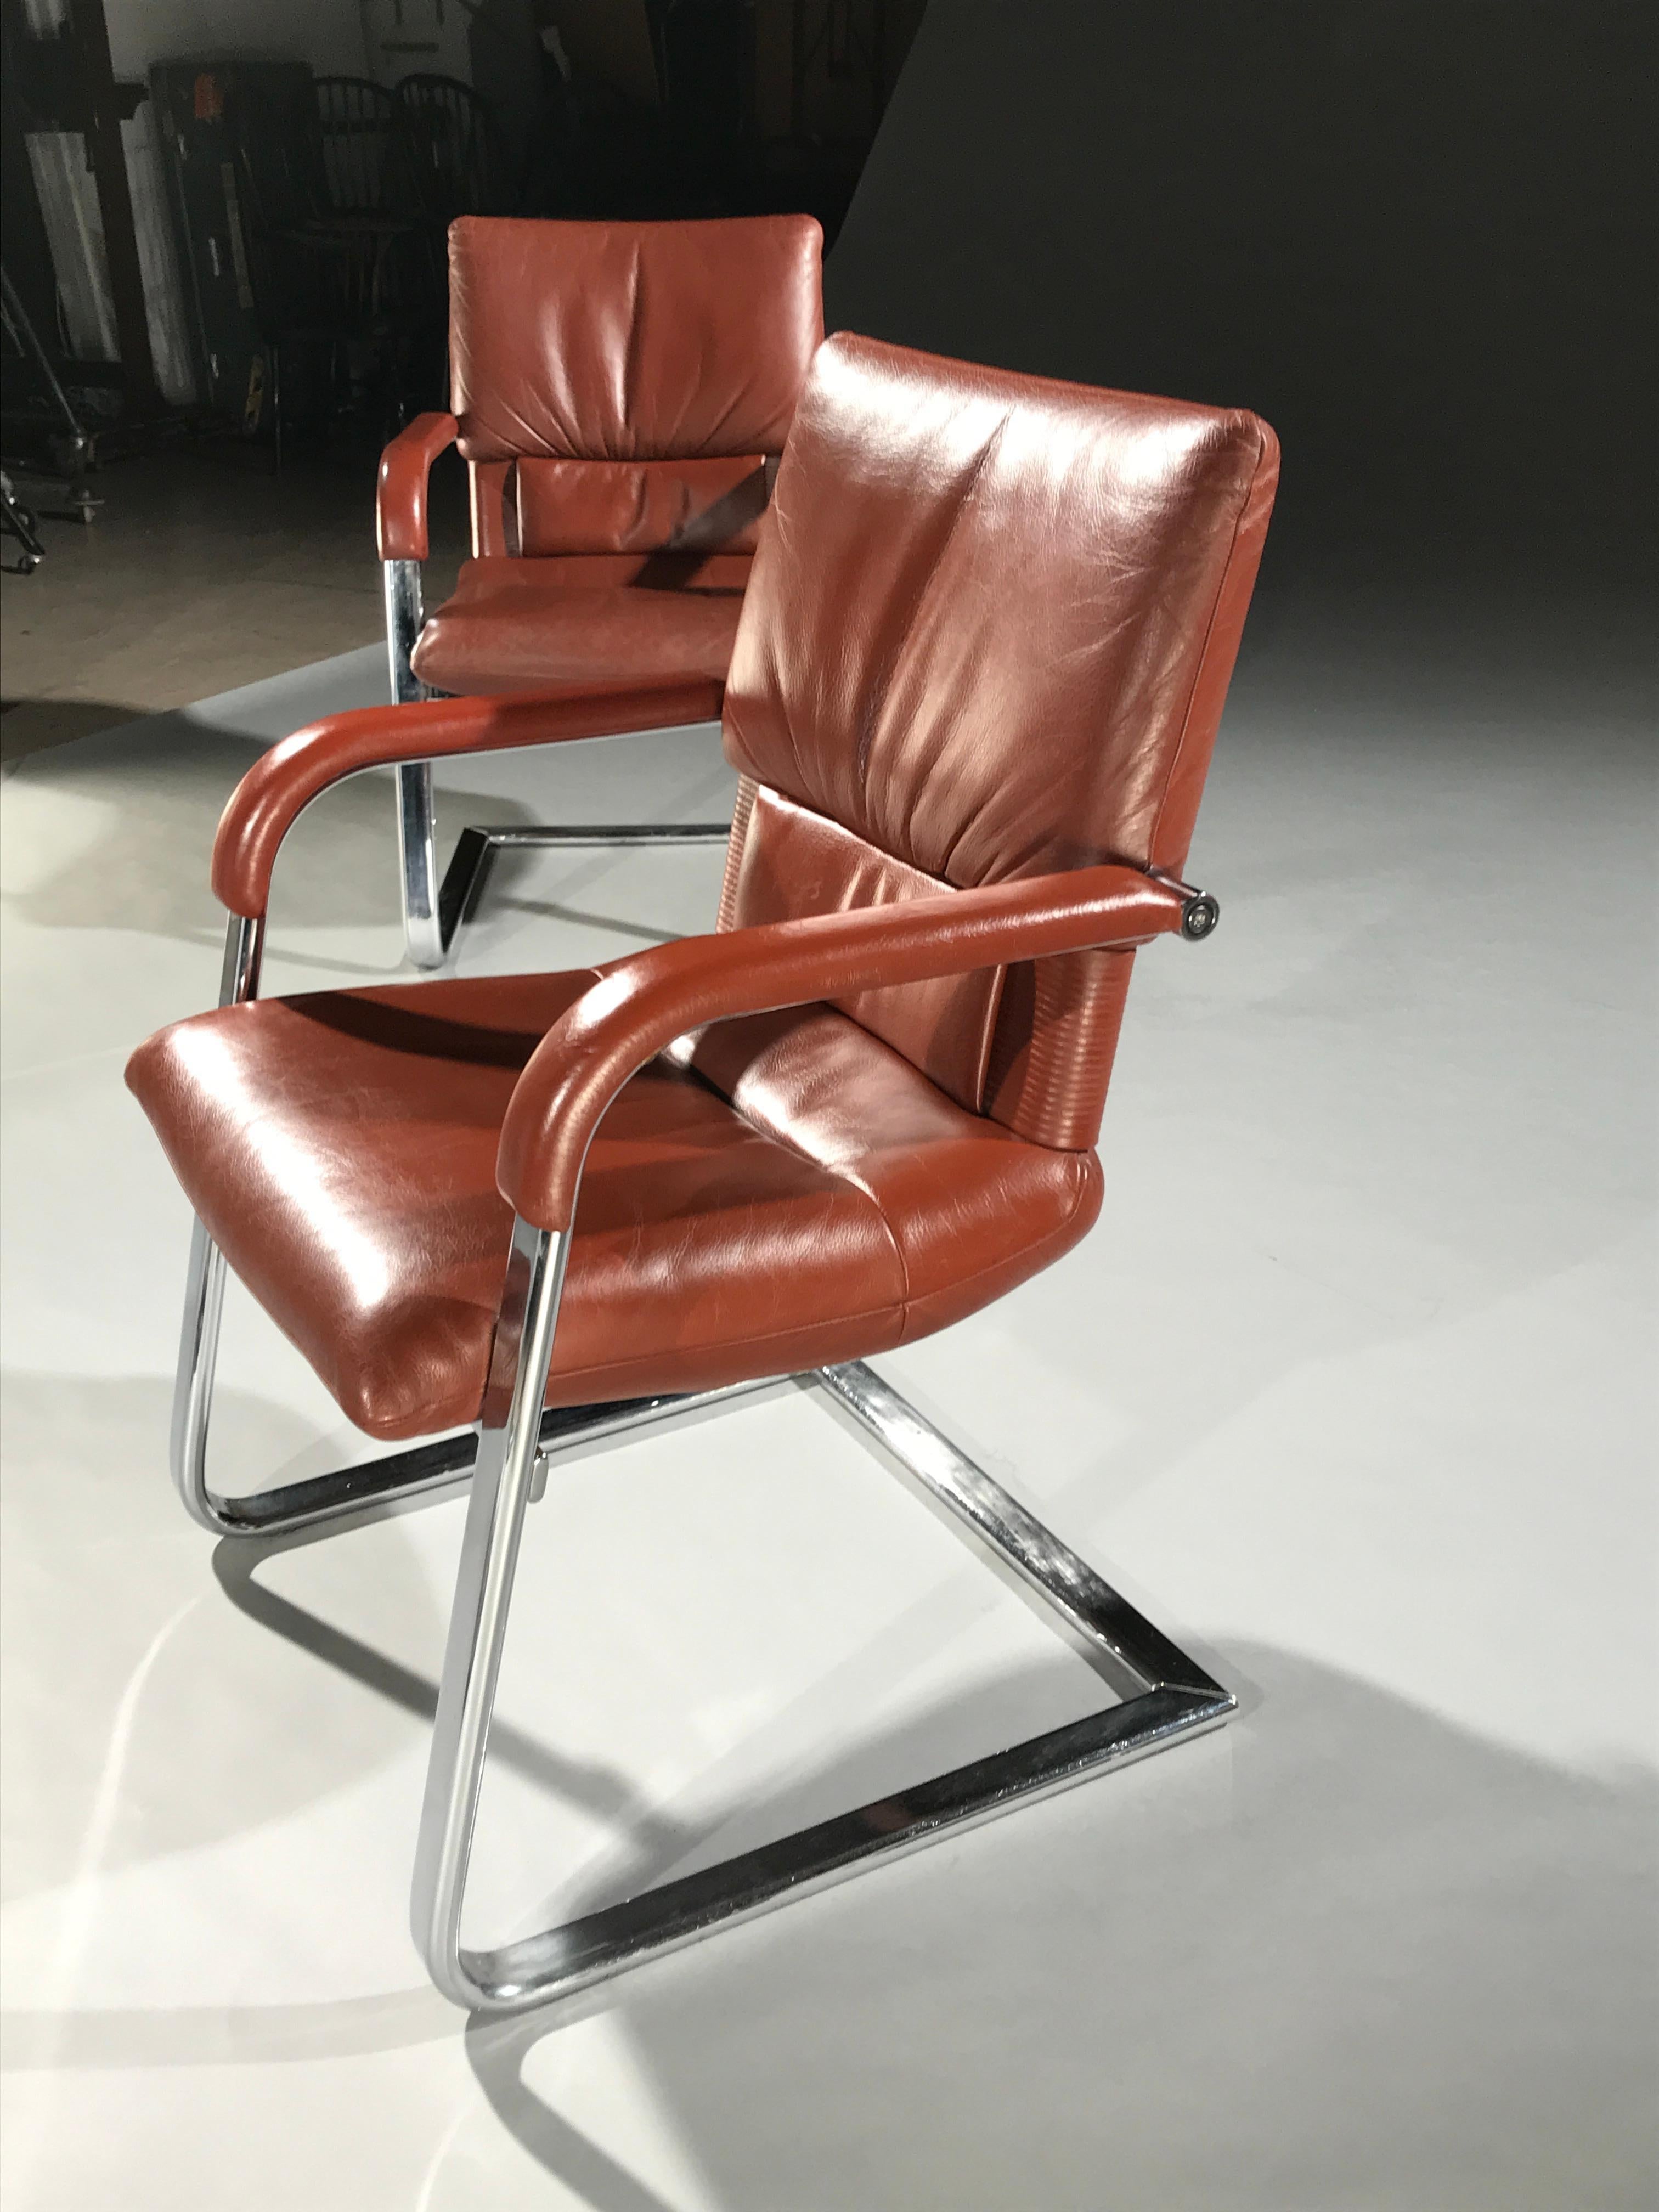 Armchair Leathertan Chrome Signed Mario Bellini Vitra Office Bellini Collection For Sale 1